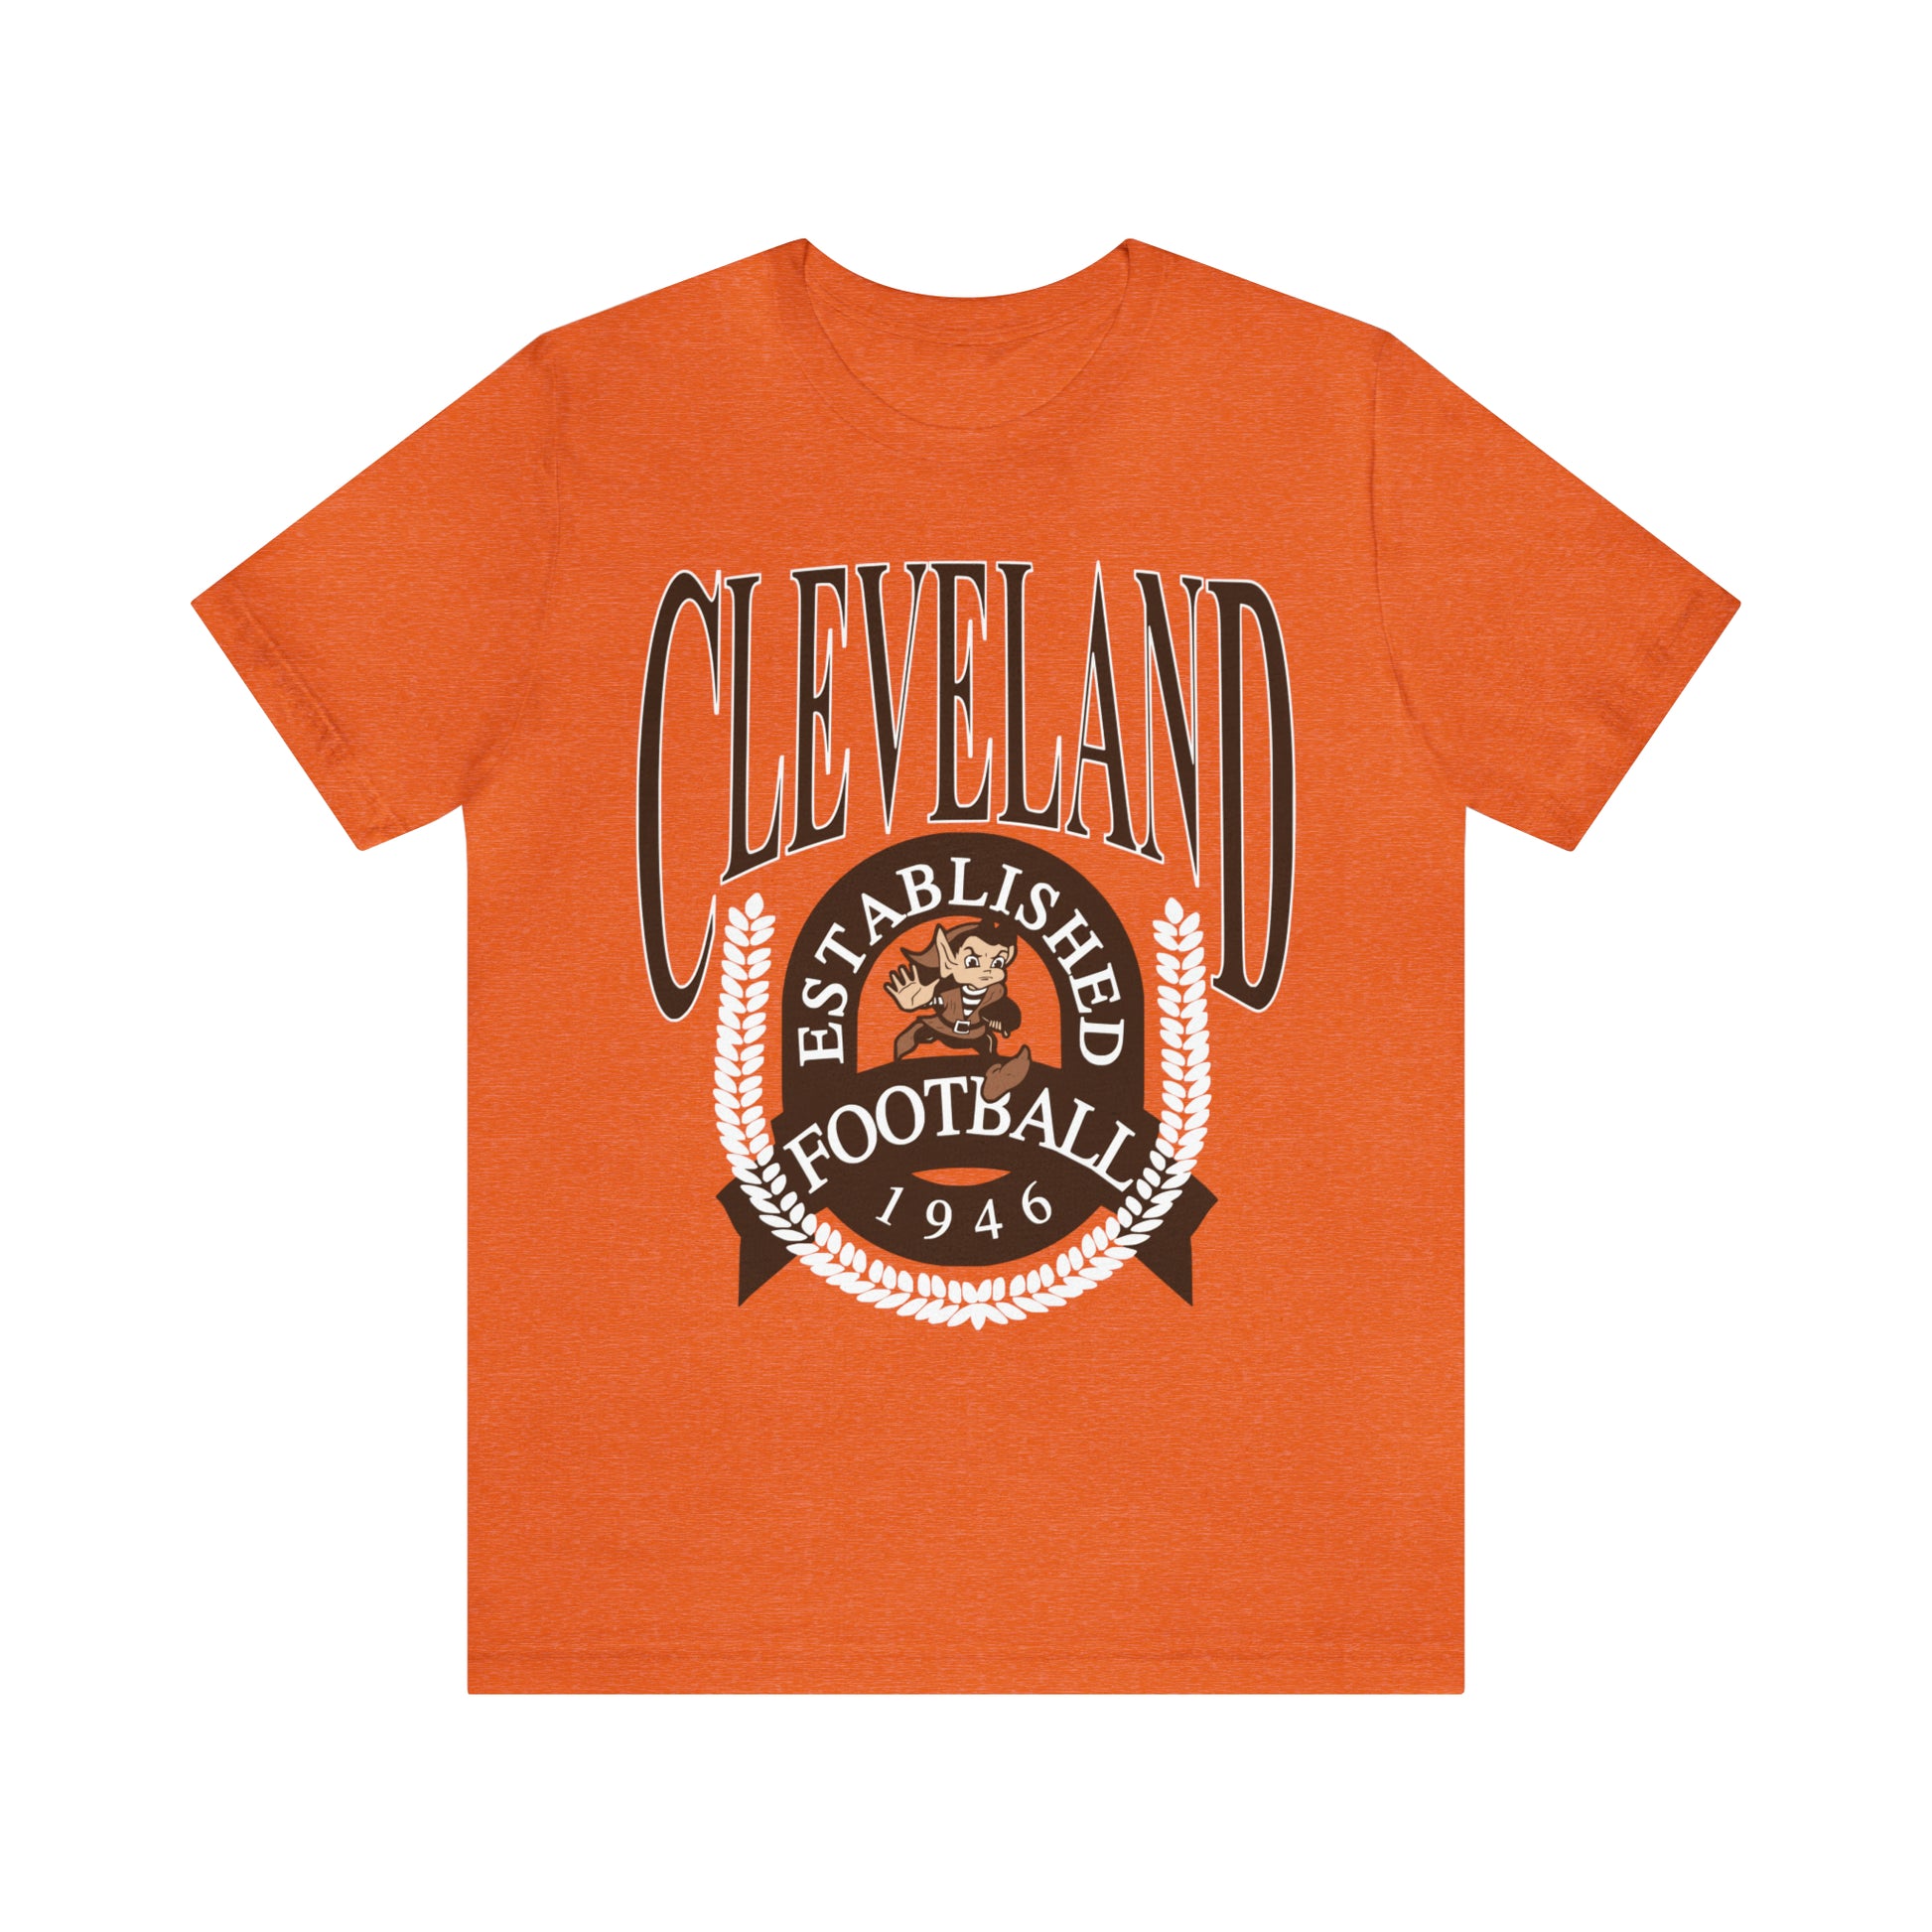 Vintage Cleveland Browns T-Shirt - Browns Short Sleeve NFL Football Tee - Dawg Pound 90's, 80's, 70's - Design 2